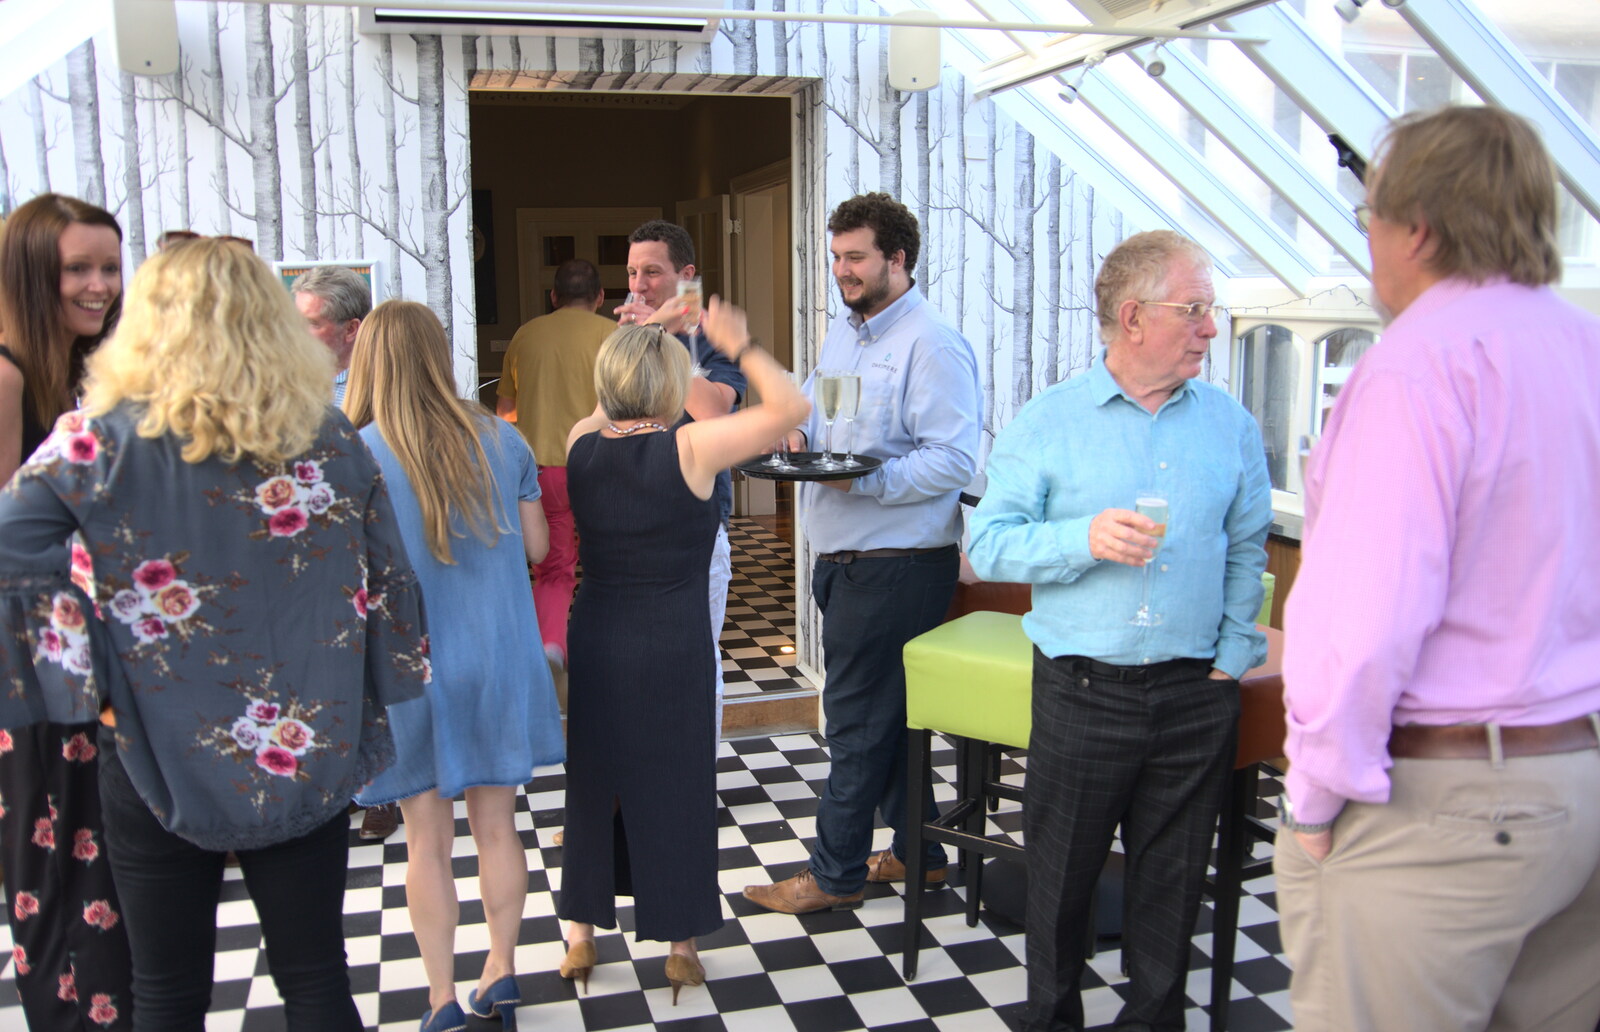 Guests mill around in the conservatory from An Oaksmere Party, Brome, Suffolk - 14th July 2018